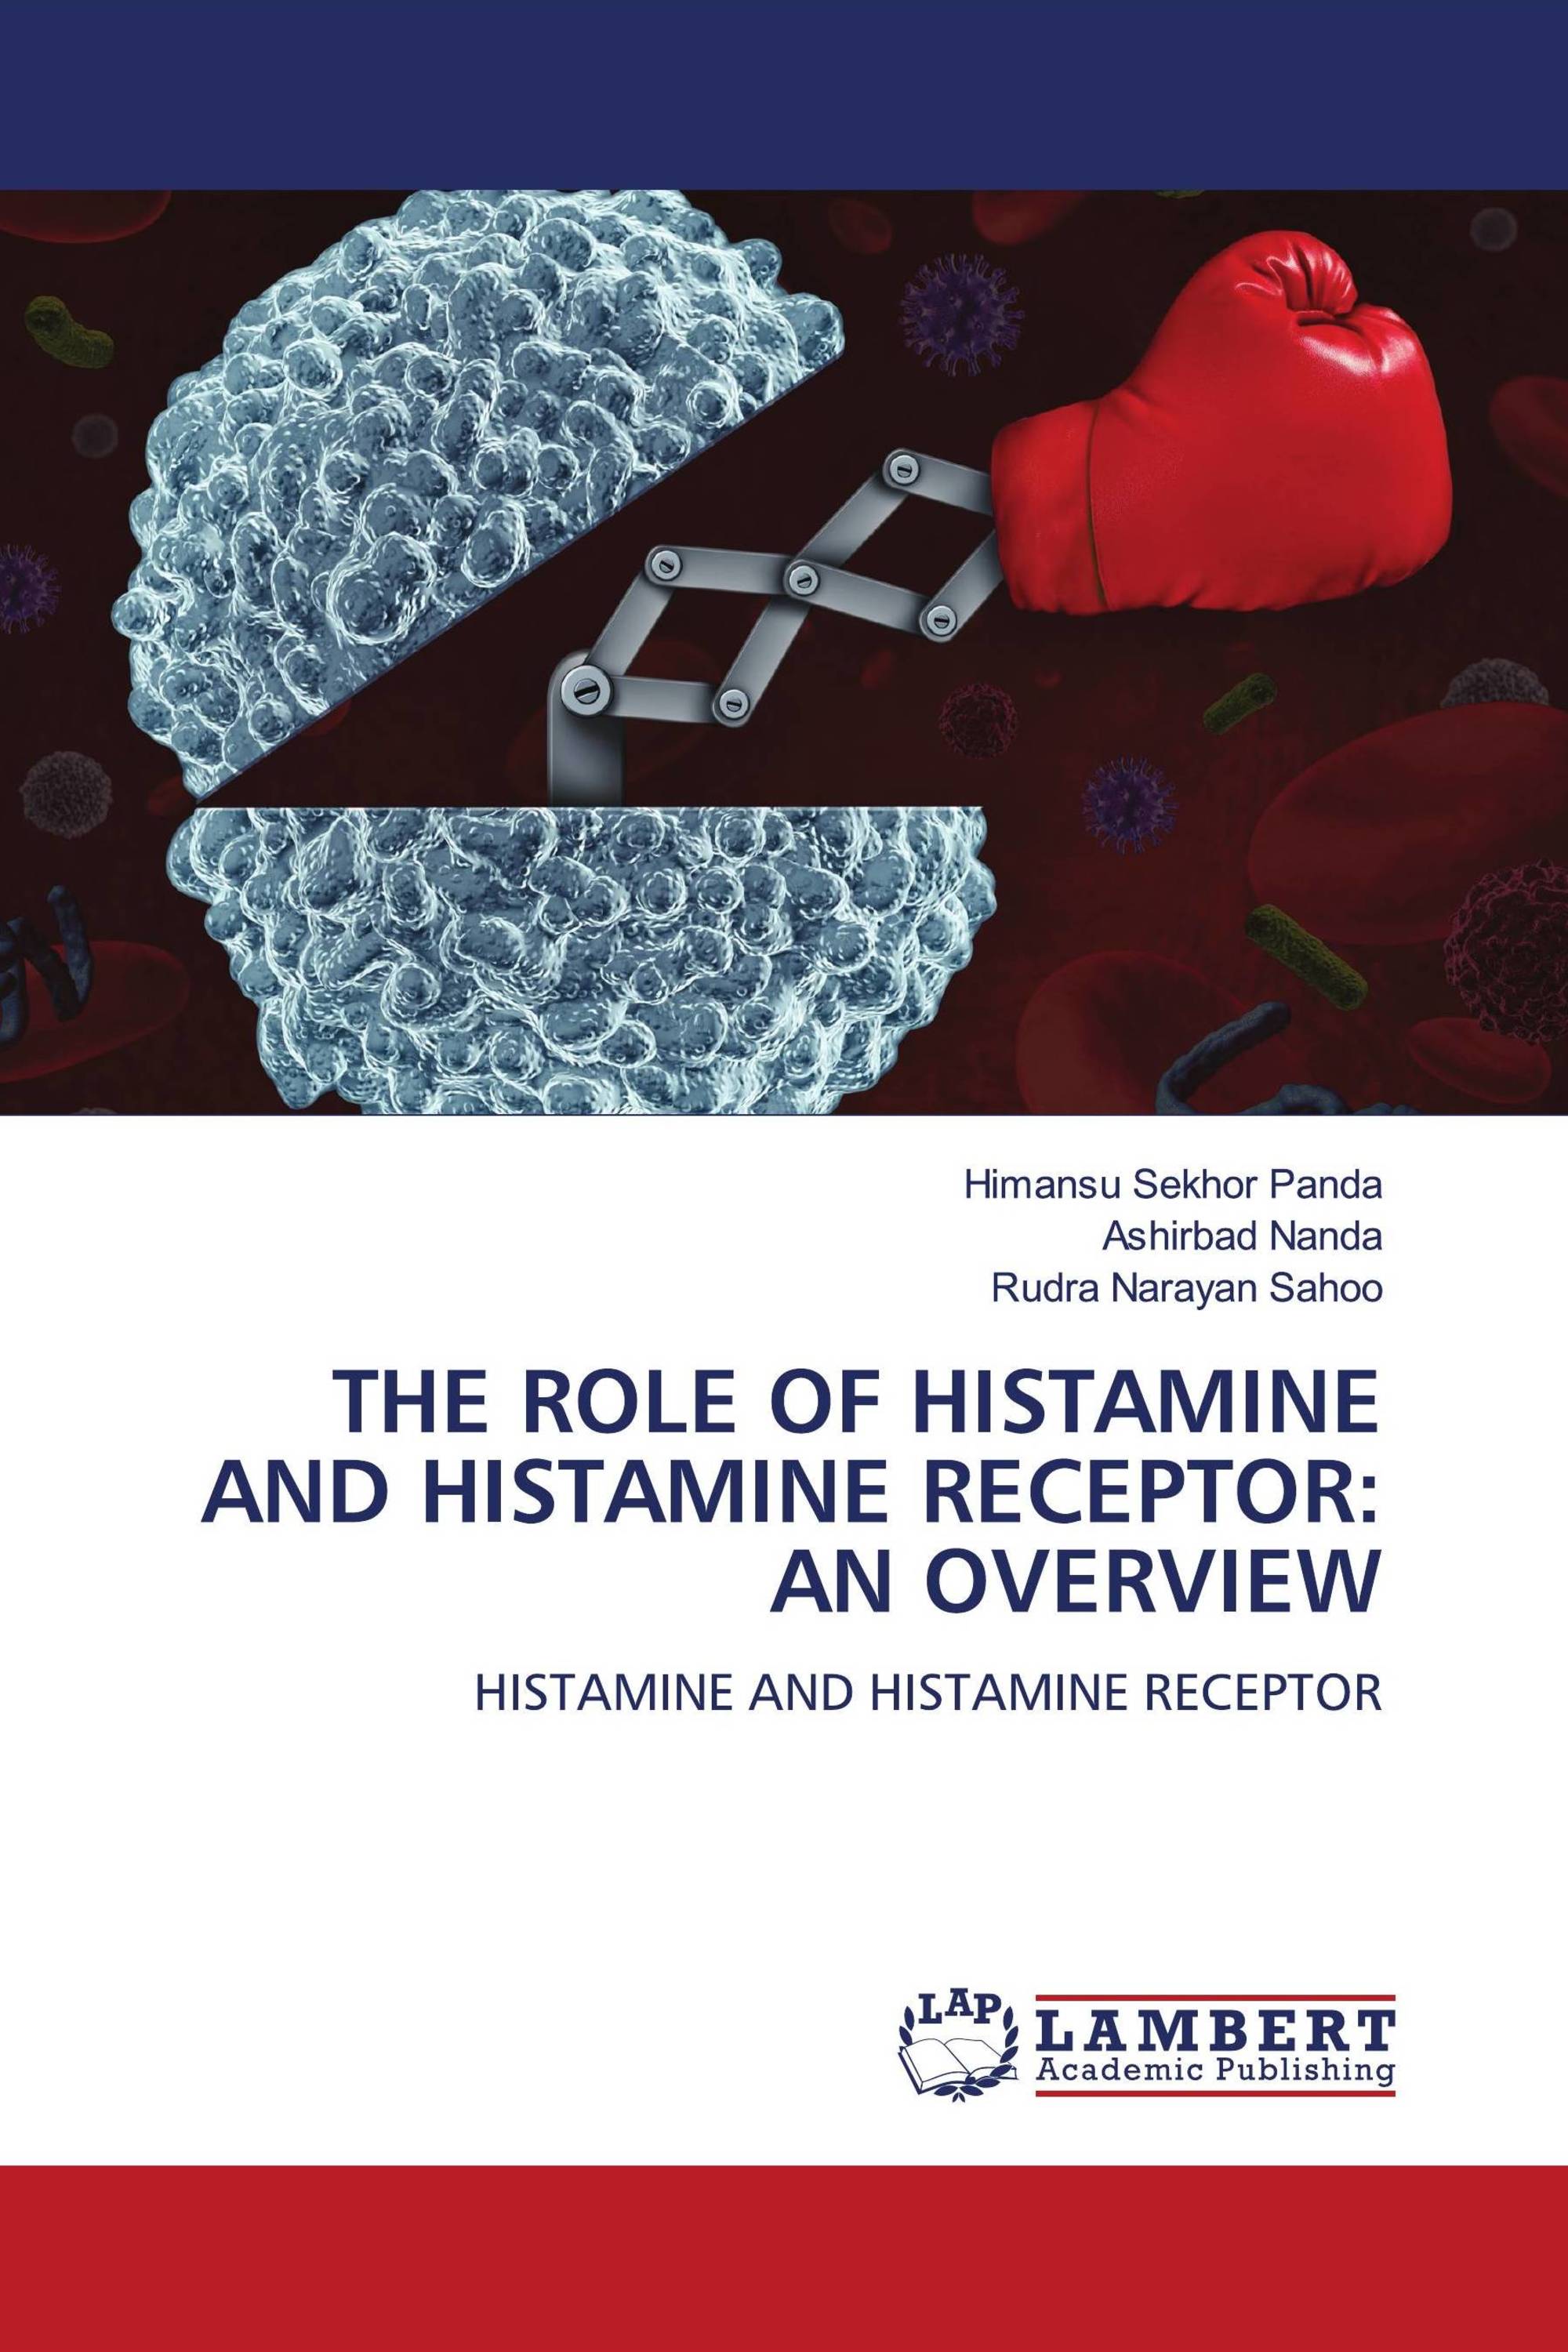 THE ROLE OF HISTAMINE AND HISTAMINE RECEPTOR: AN OVERVIEW